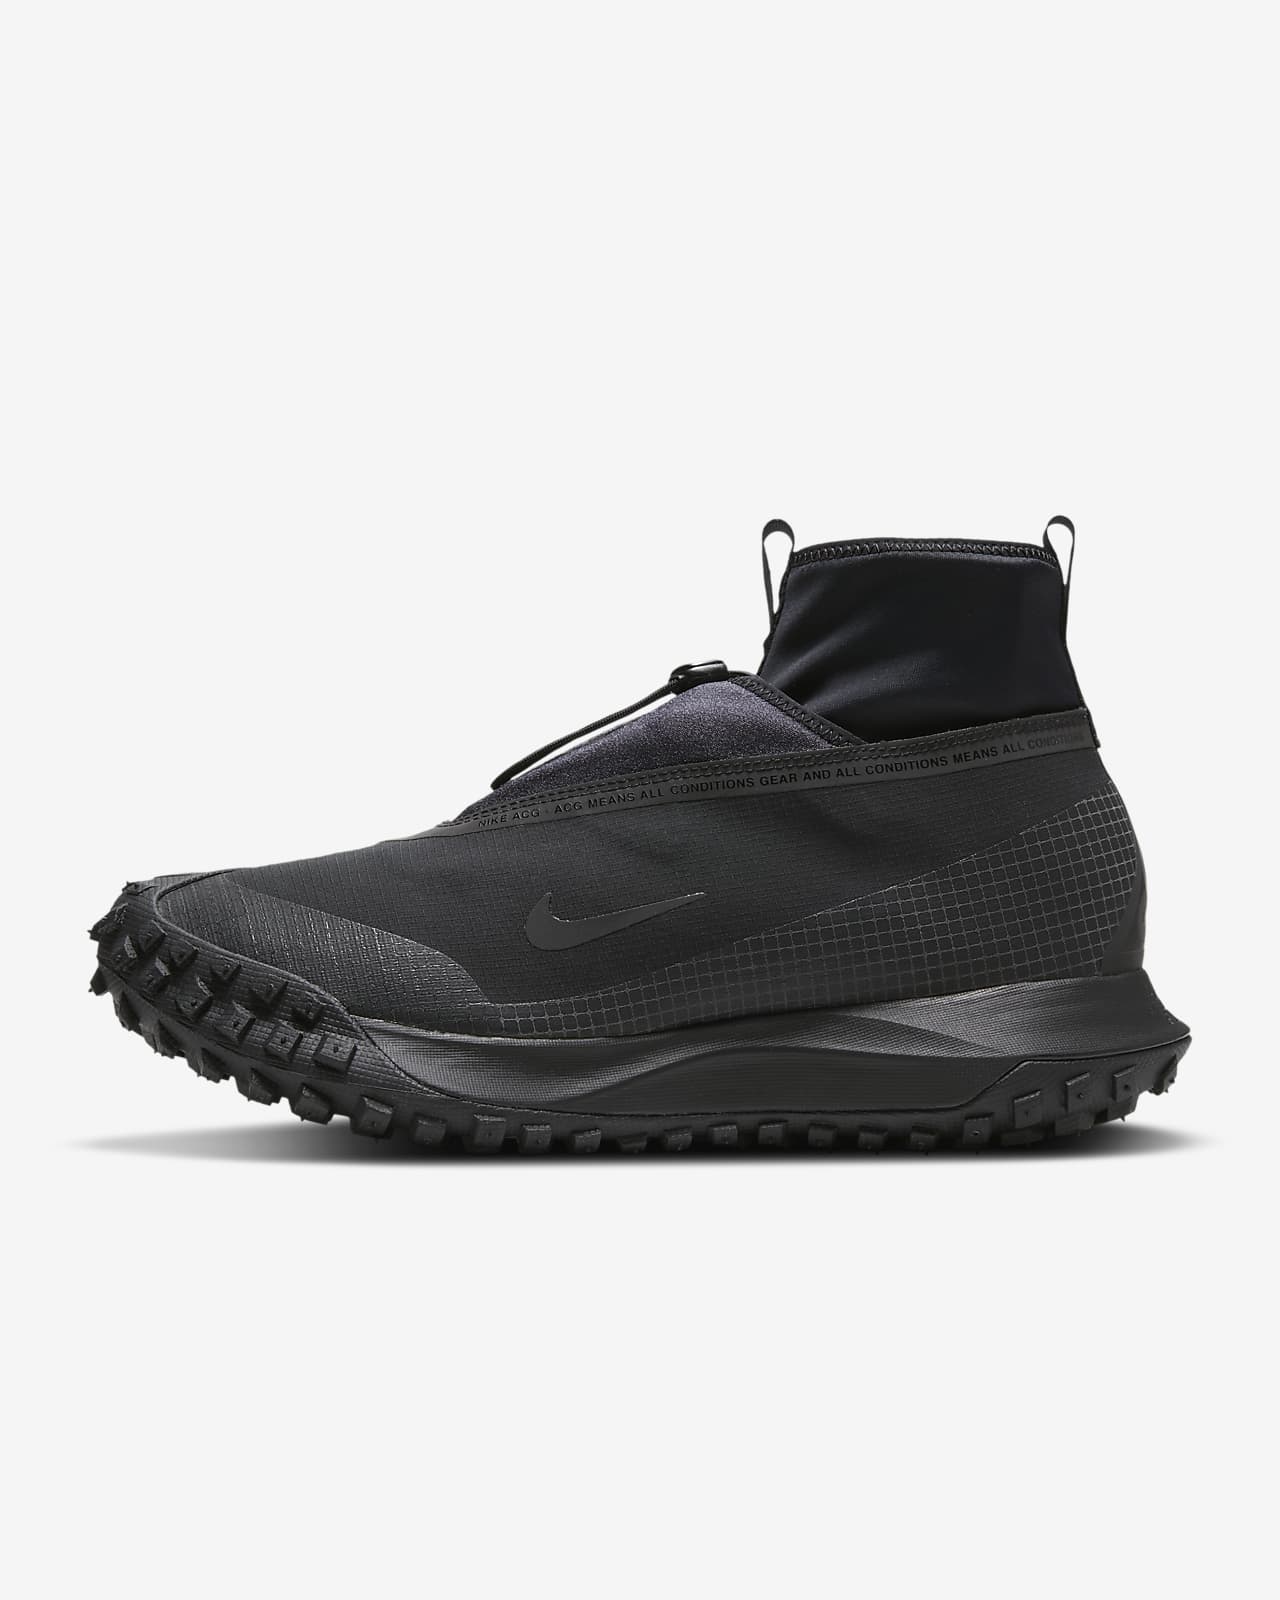 nike acg shoes review